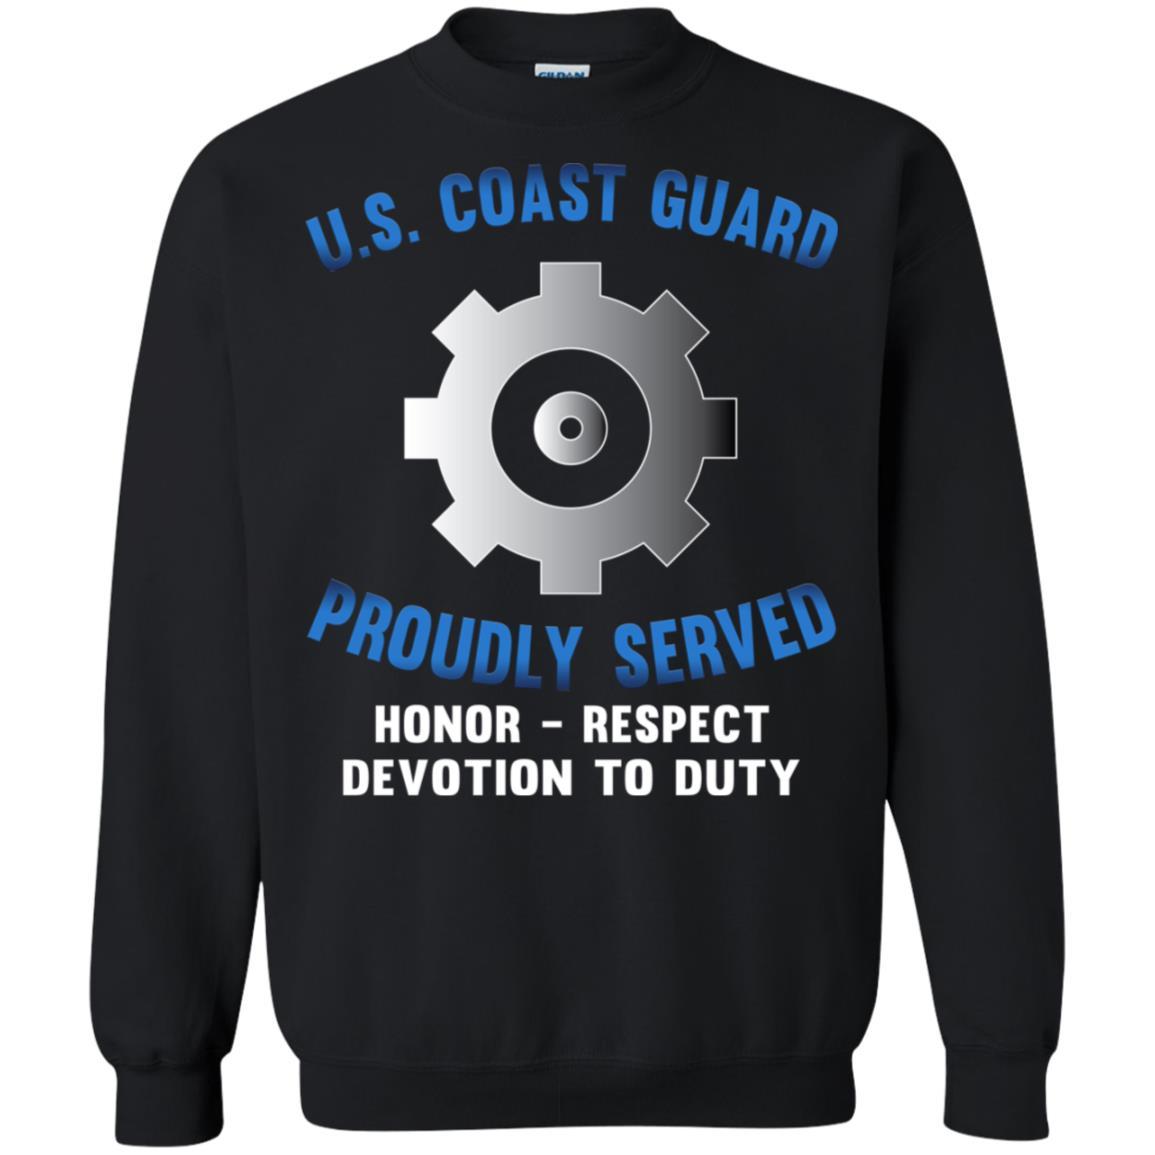 US Coast Guard Machinery Technician MK Logo Proudly Served T-Shirt For Men On Front-TShirt-USCG-Veterans Nation